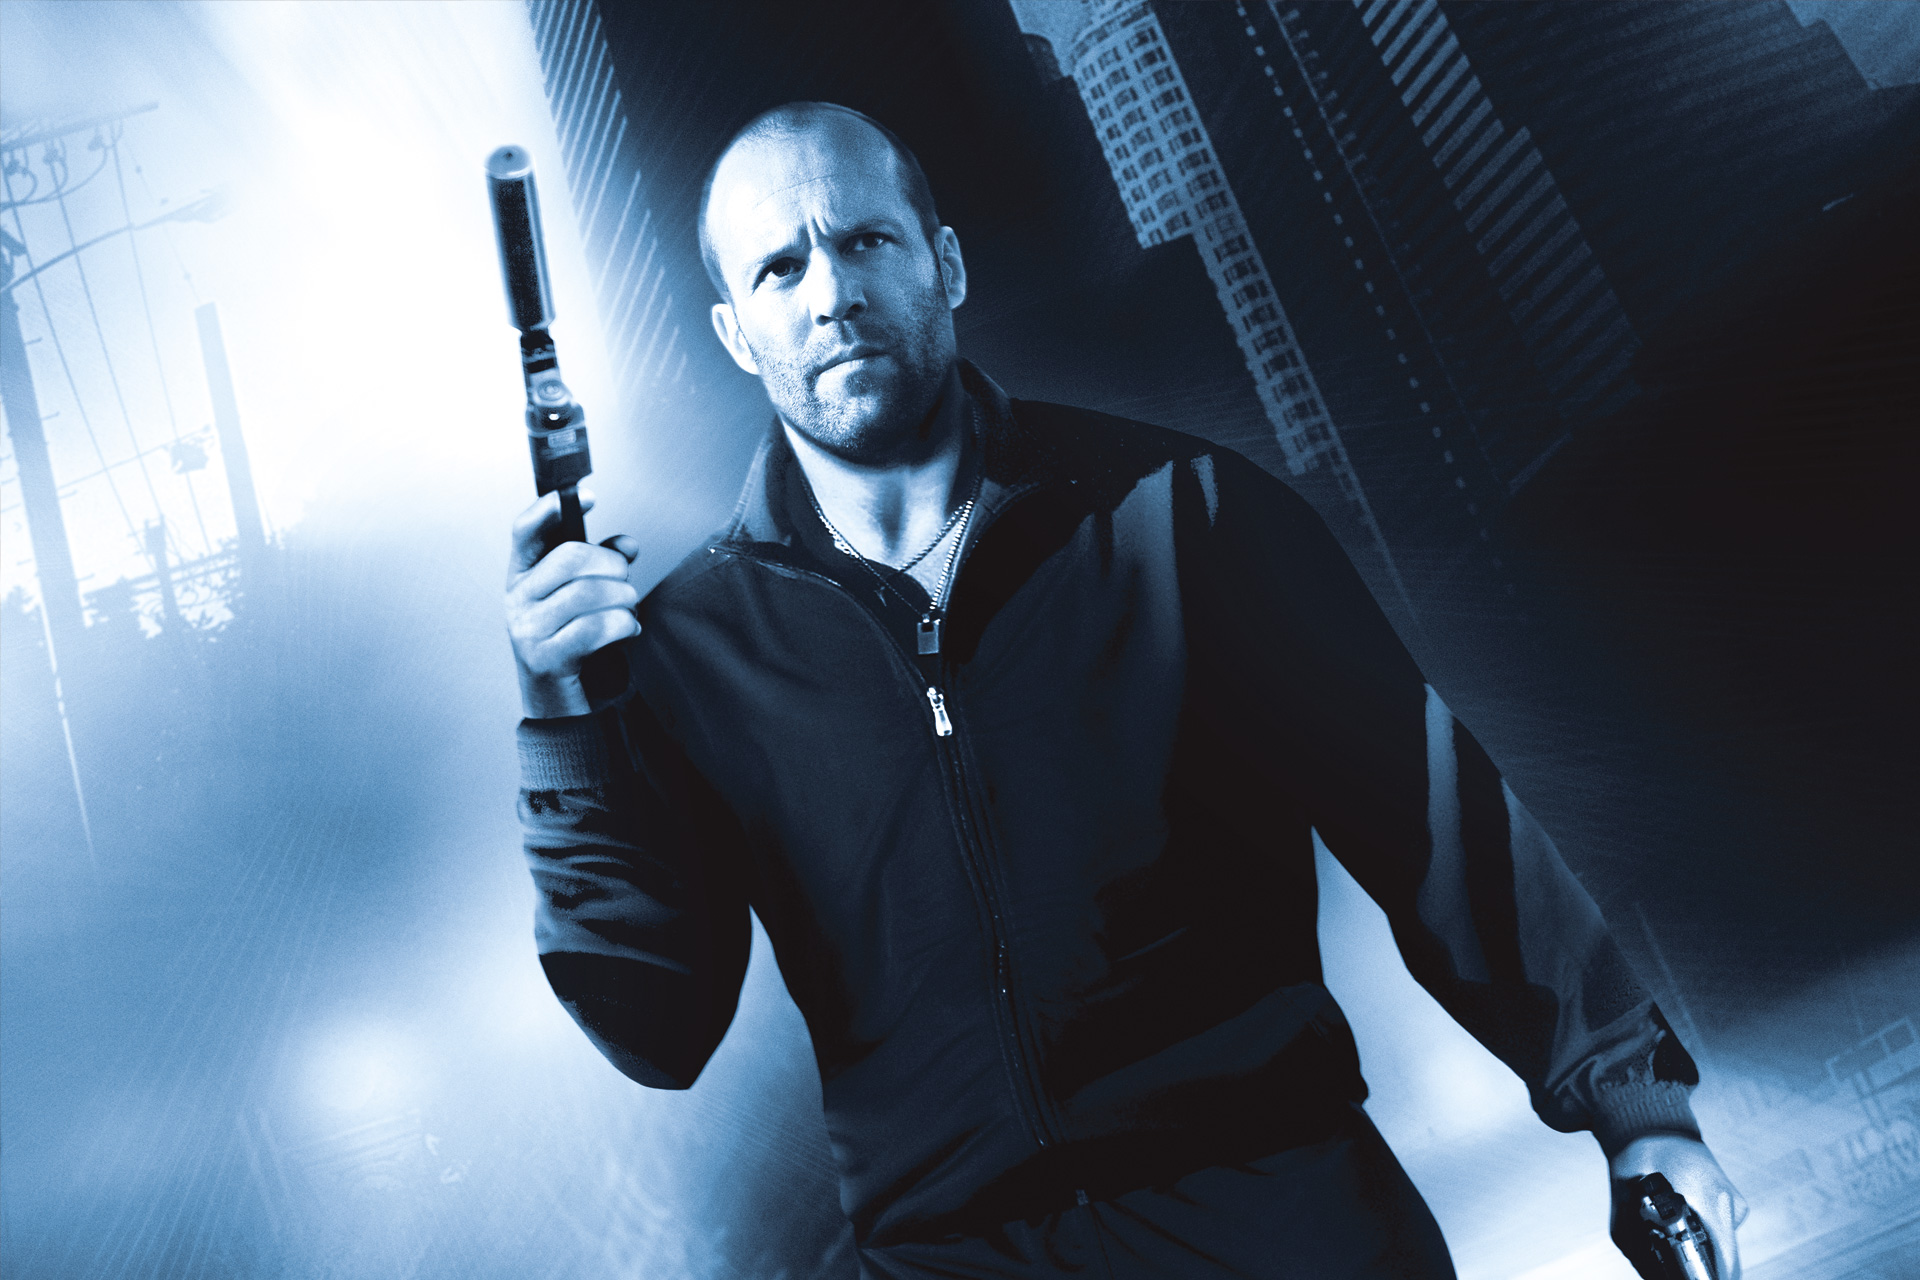 Jason Statham wearing black jacket while holding guns with both of his hands